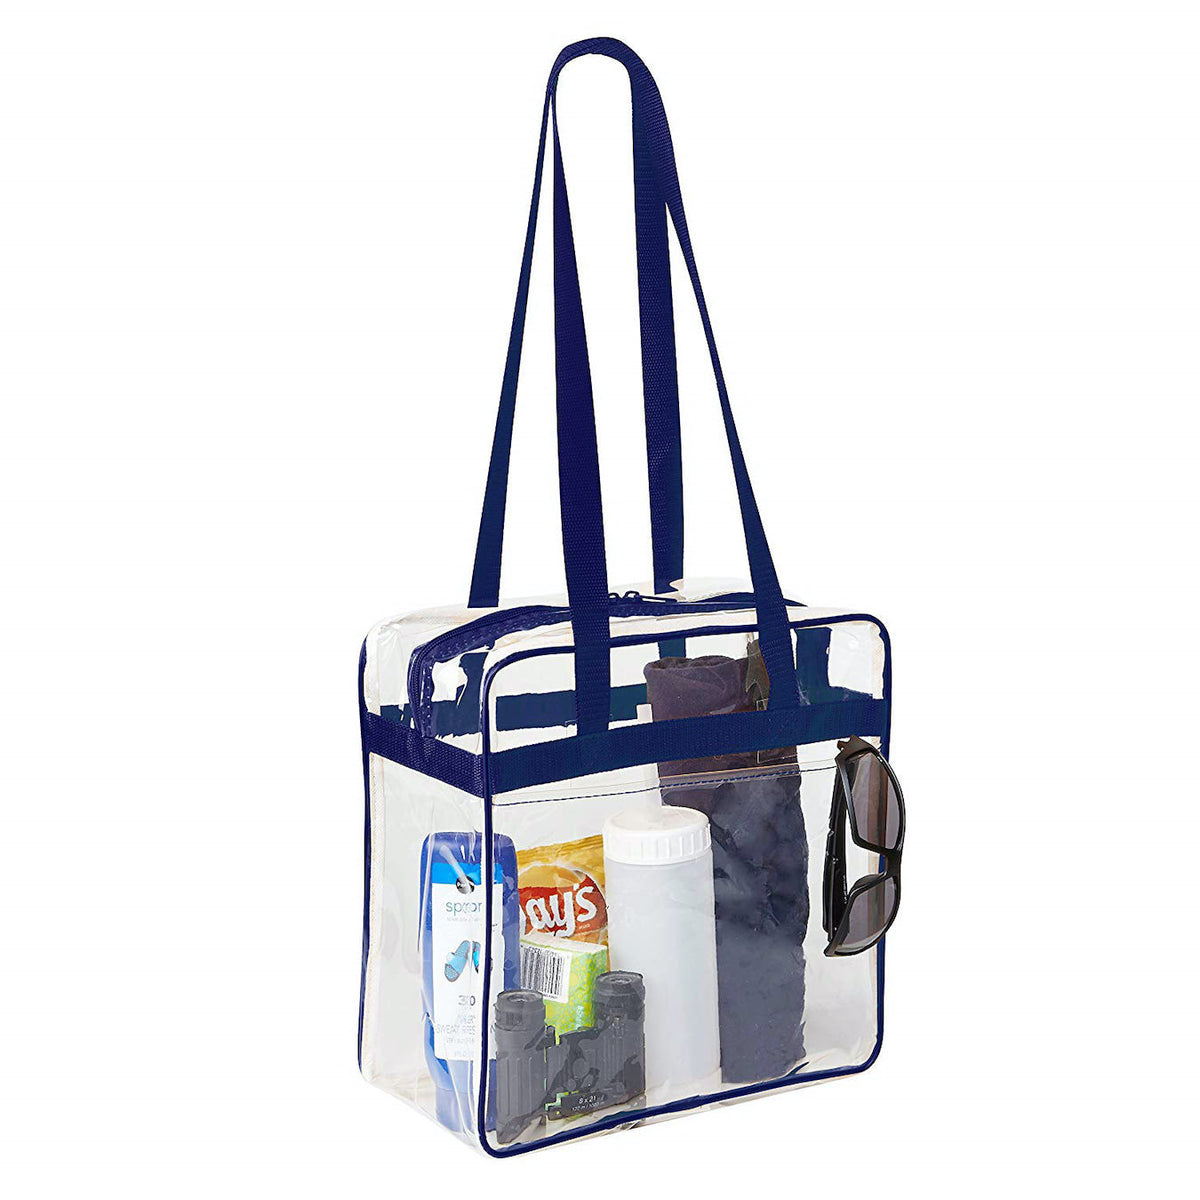 Clear 12 x 12 x 6 Tote Bag Navy Blue –